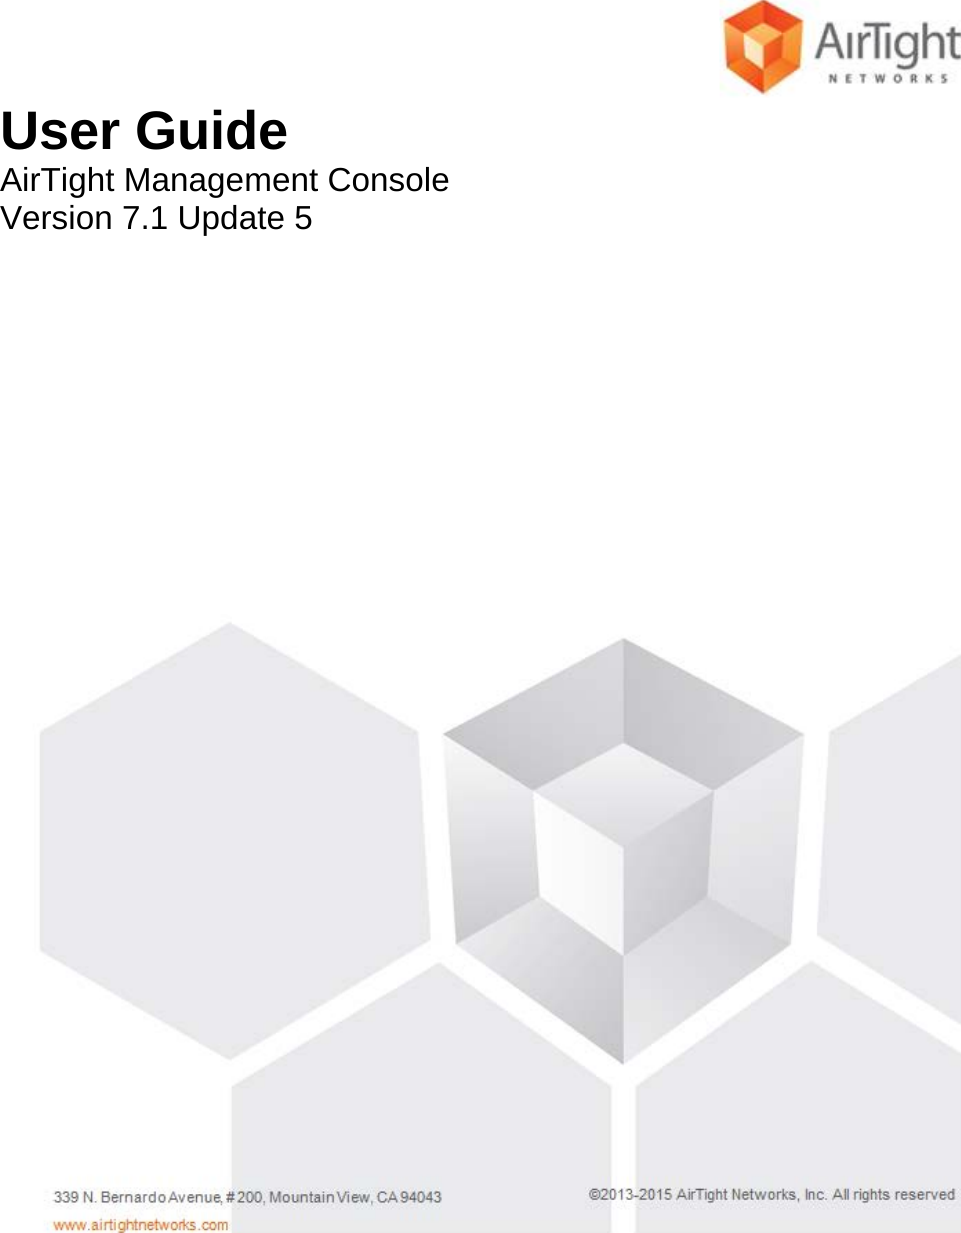  User Guide AirTight Management Console Version 7.1 Update 5                 